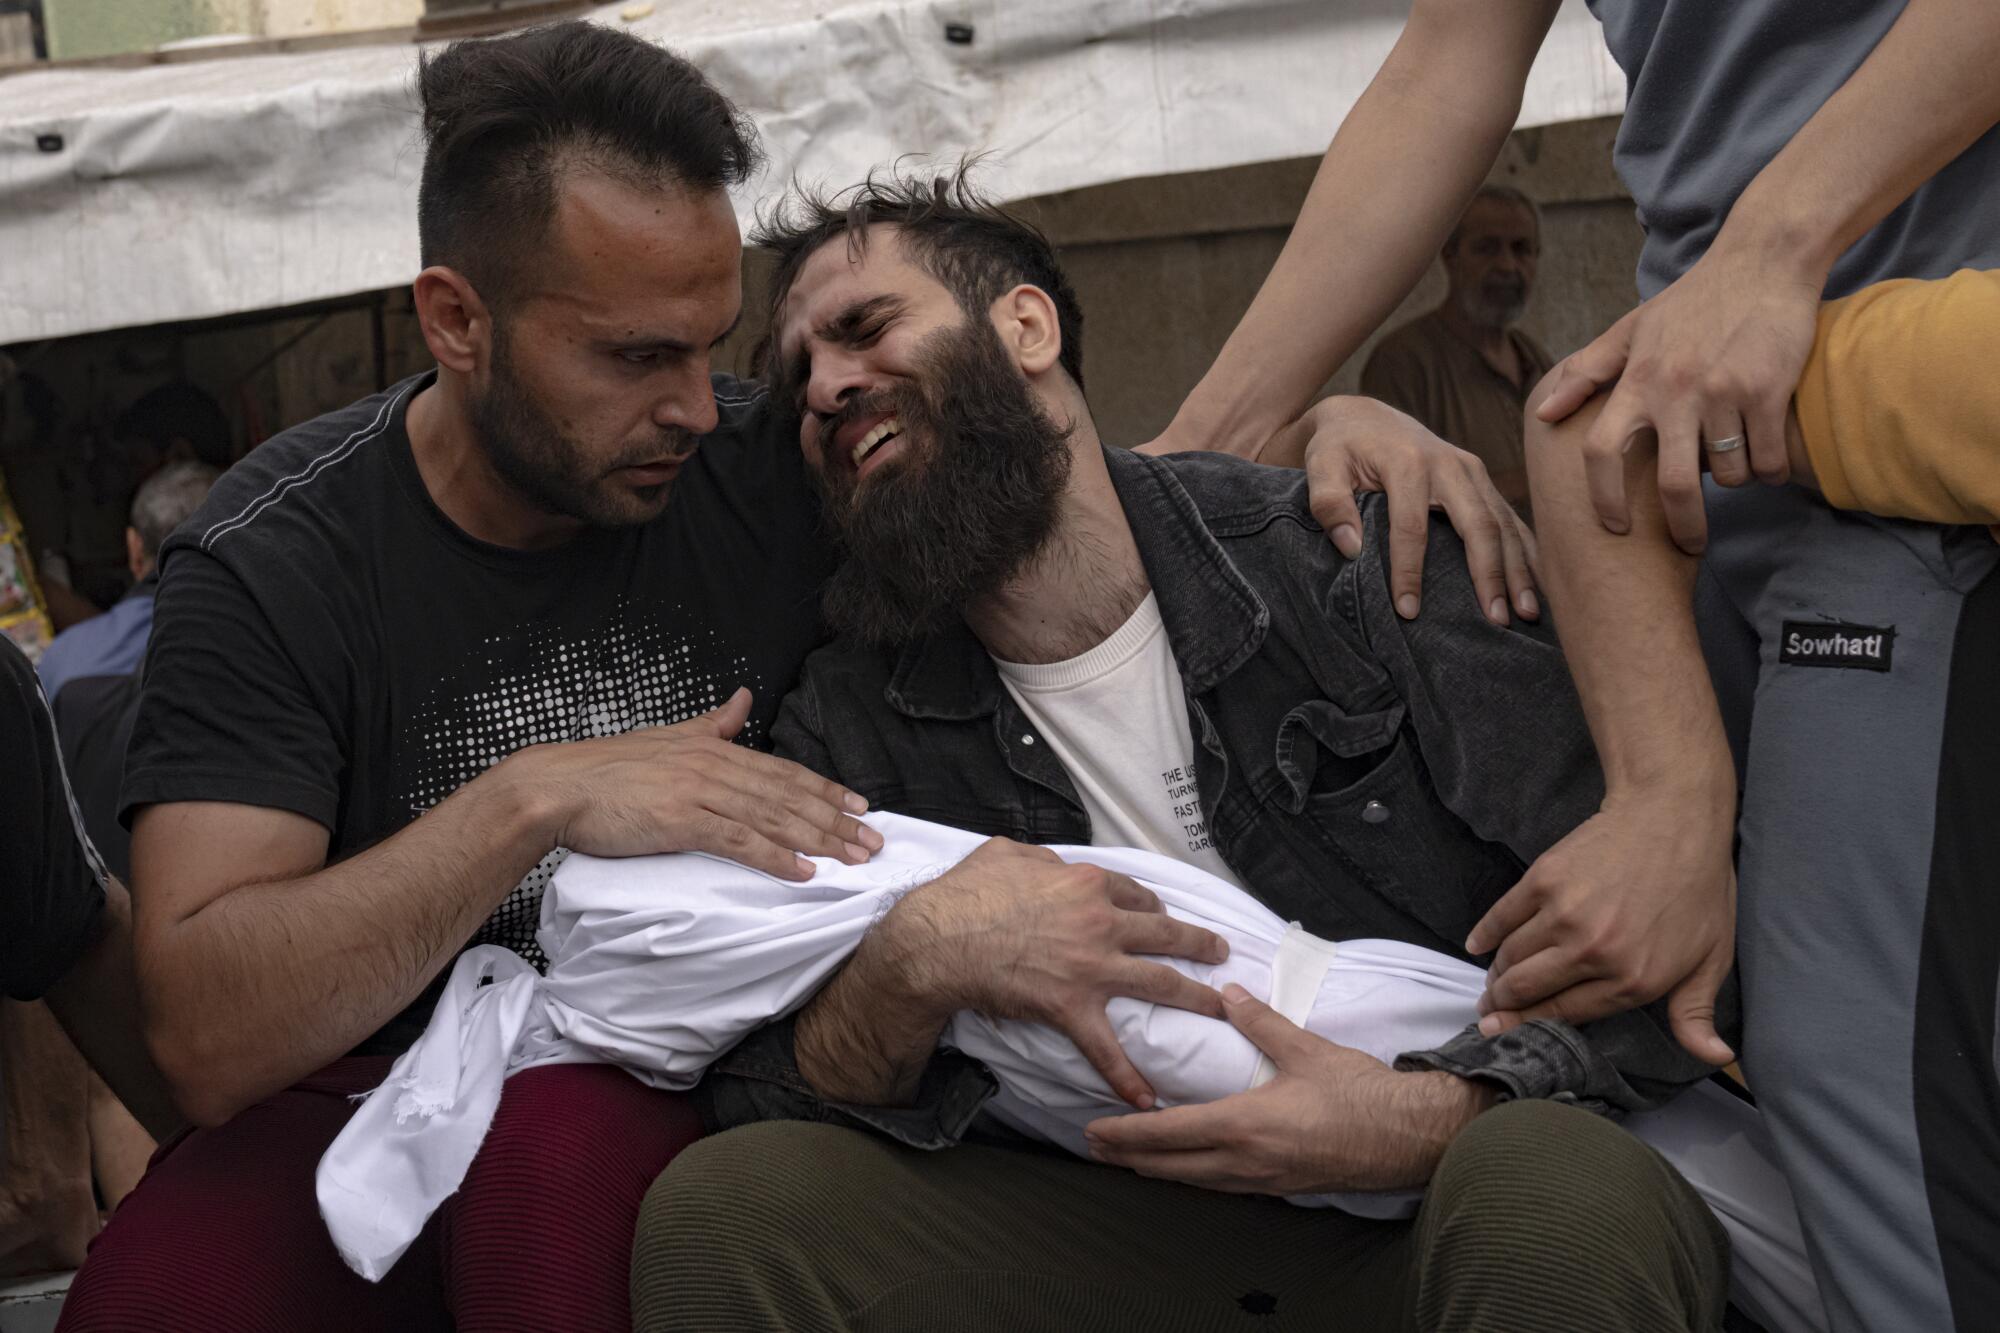 Two Palestinian men crying with the body of a small child wrapped in white cloth   